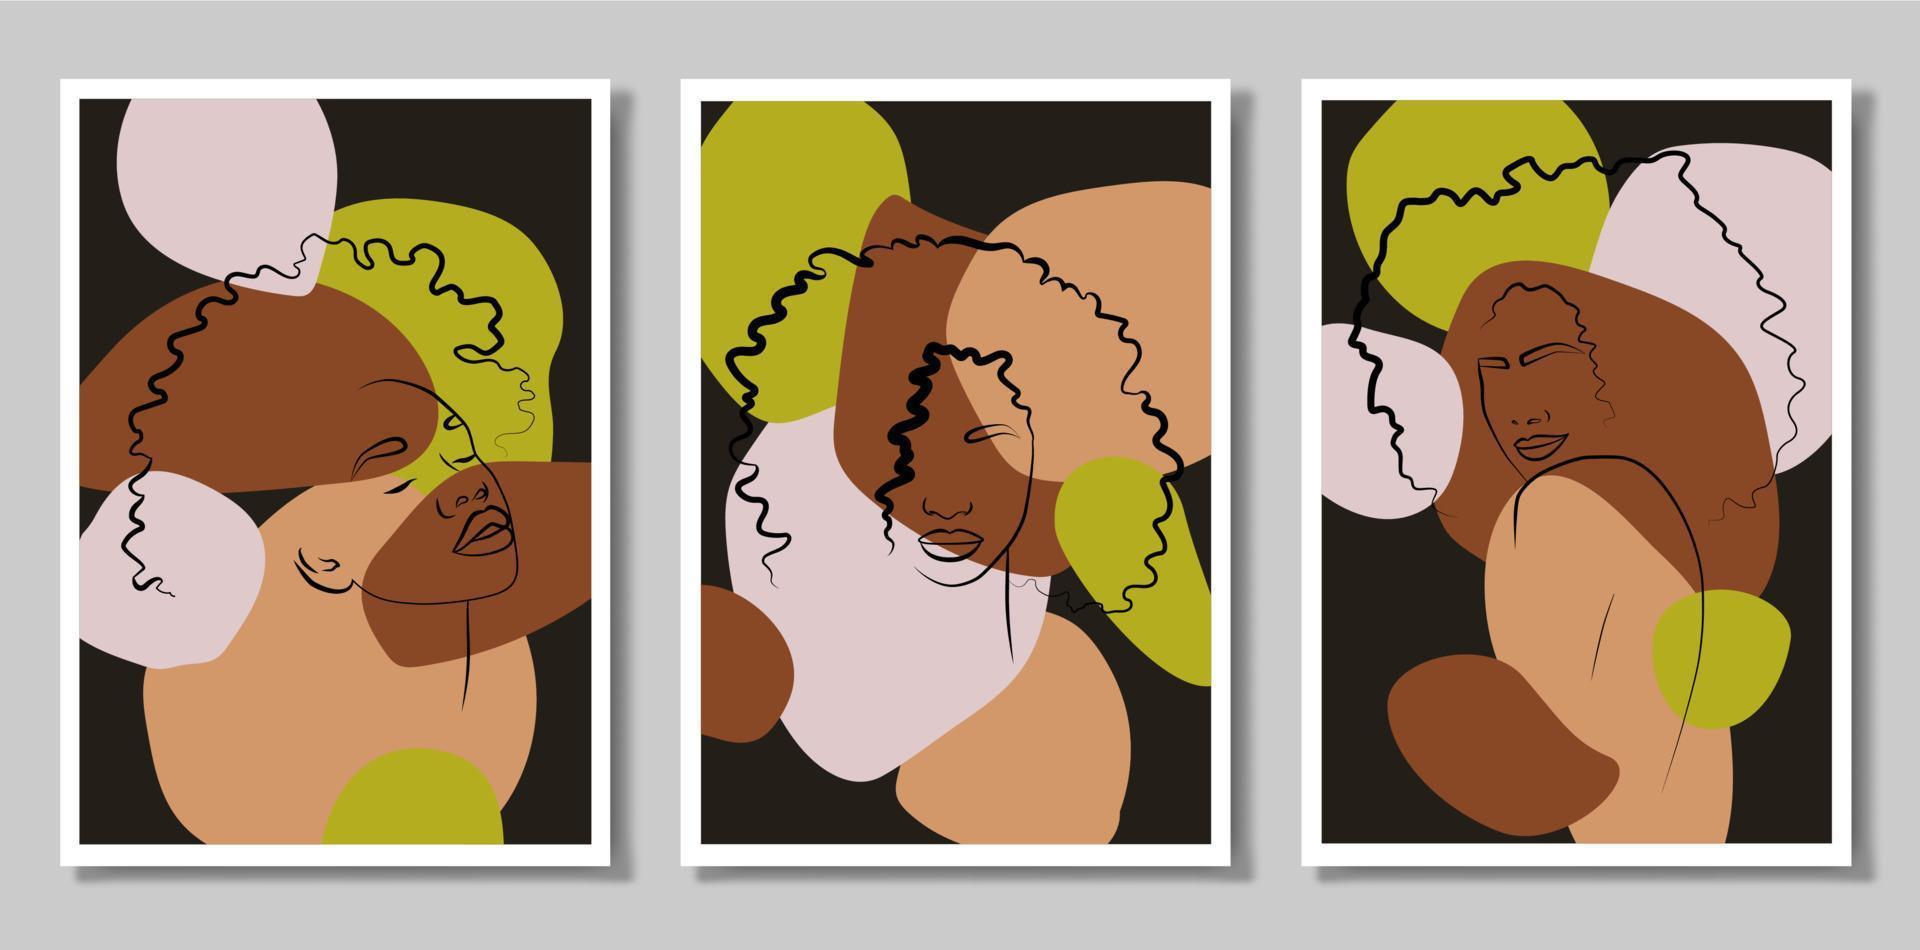 An abstraction set with a face and hands. Vector illustration of the face of an African woman with a turban. In a minimalistic abstract style.